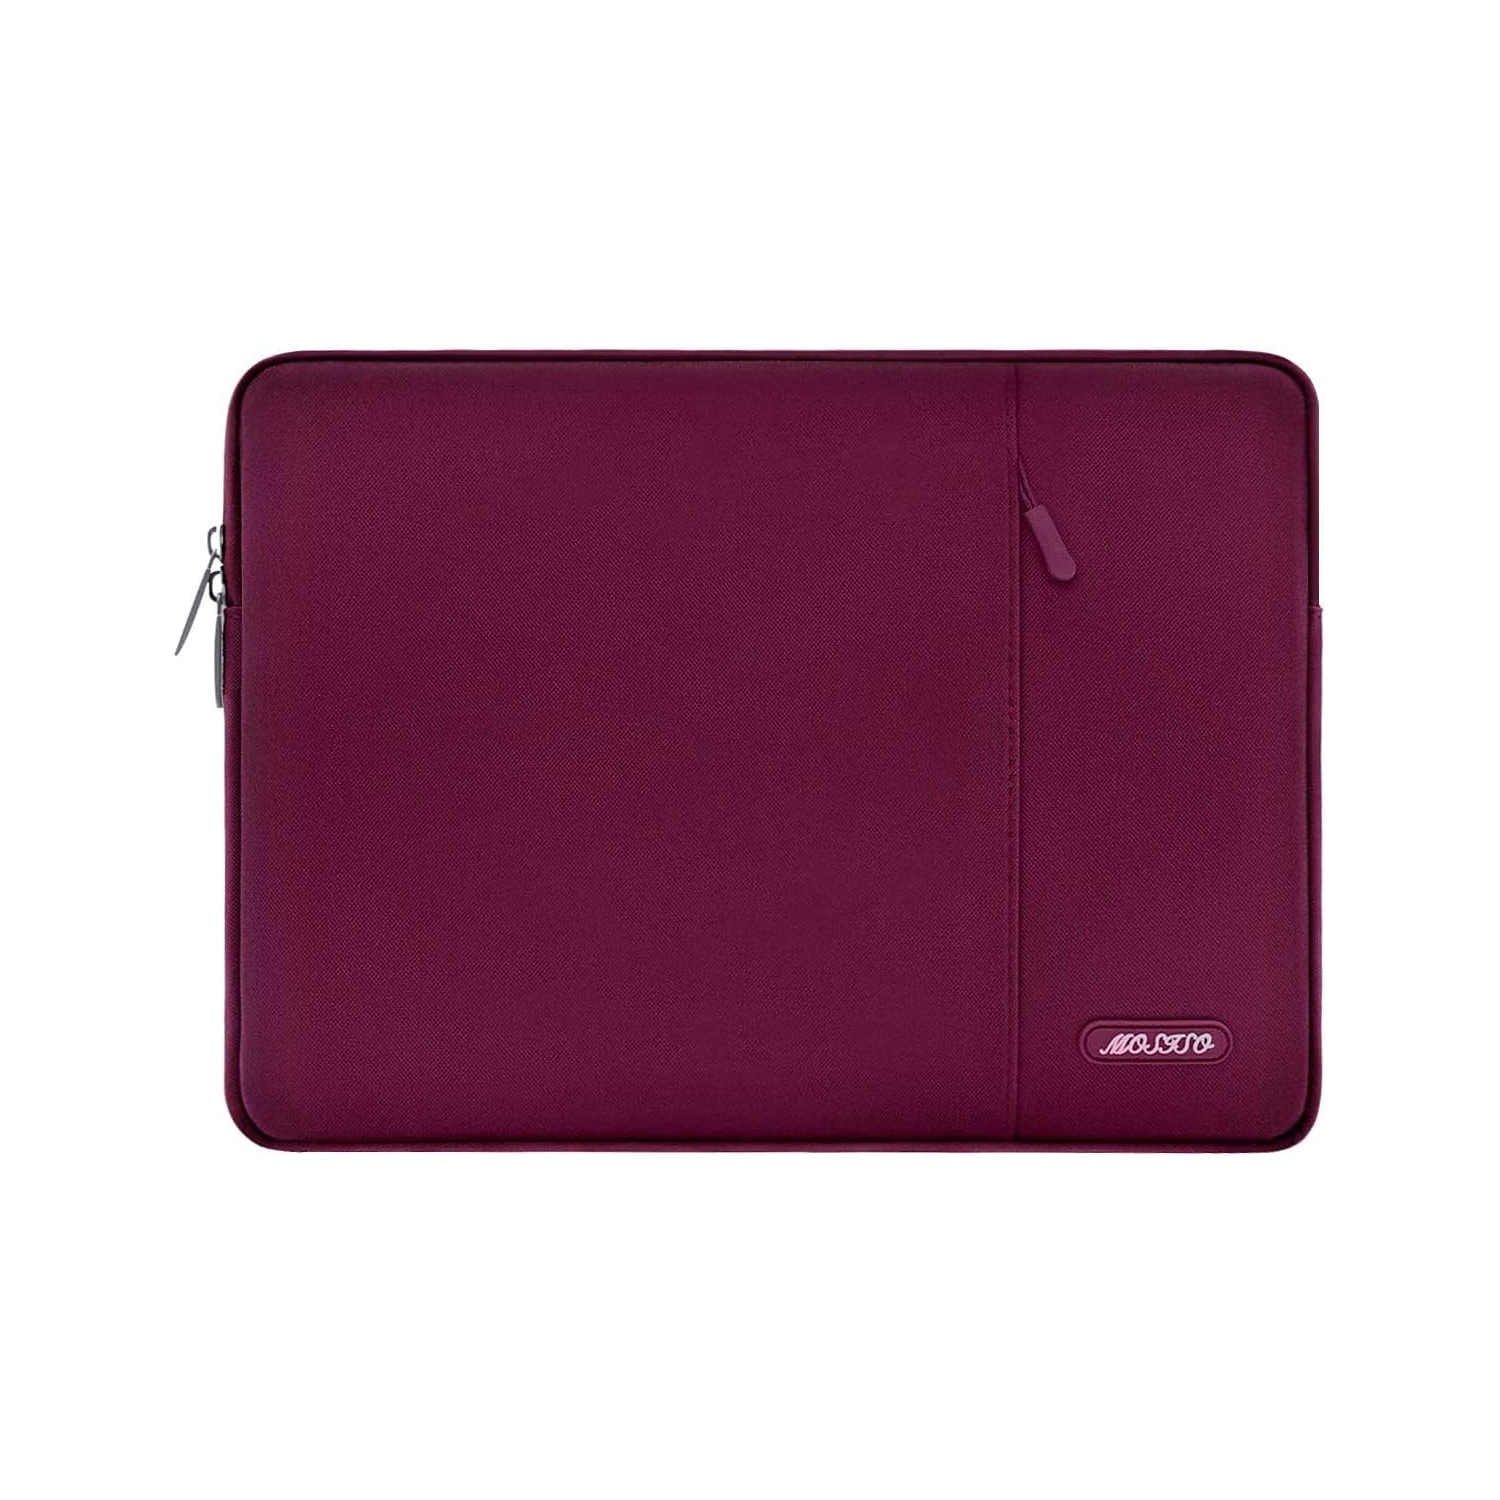 Laptop Sleeve Bag Compatible with Laptop 13 inch, Polyester Vertical Case with Pocket, Wine Red